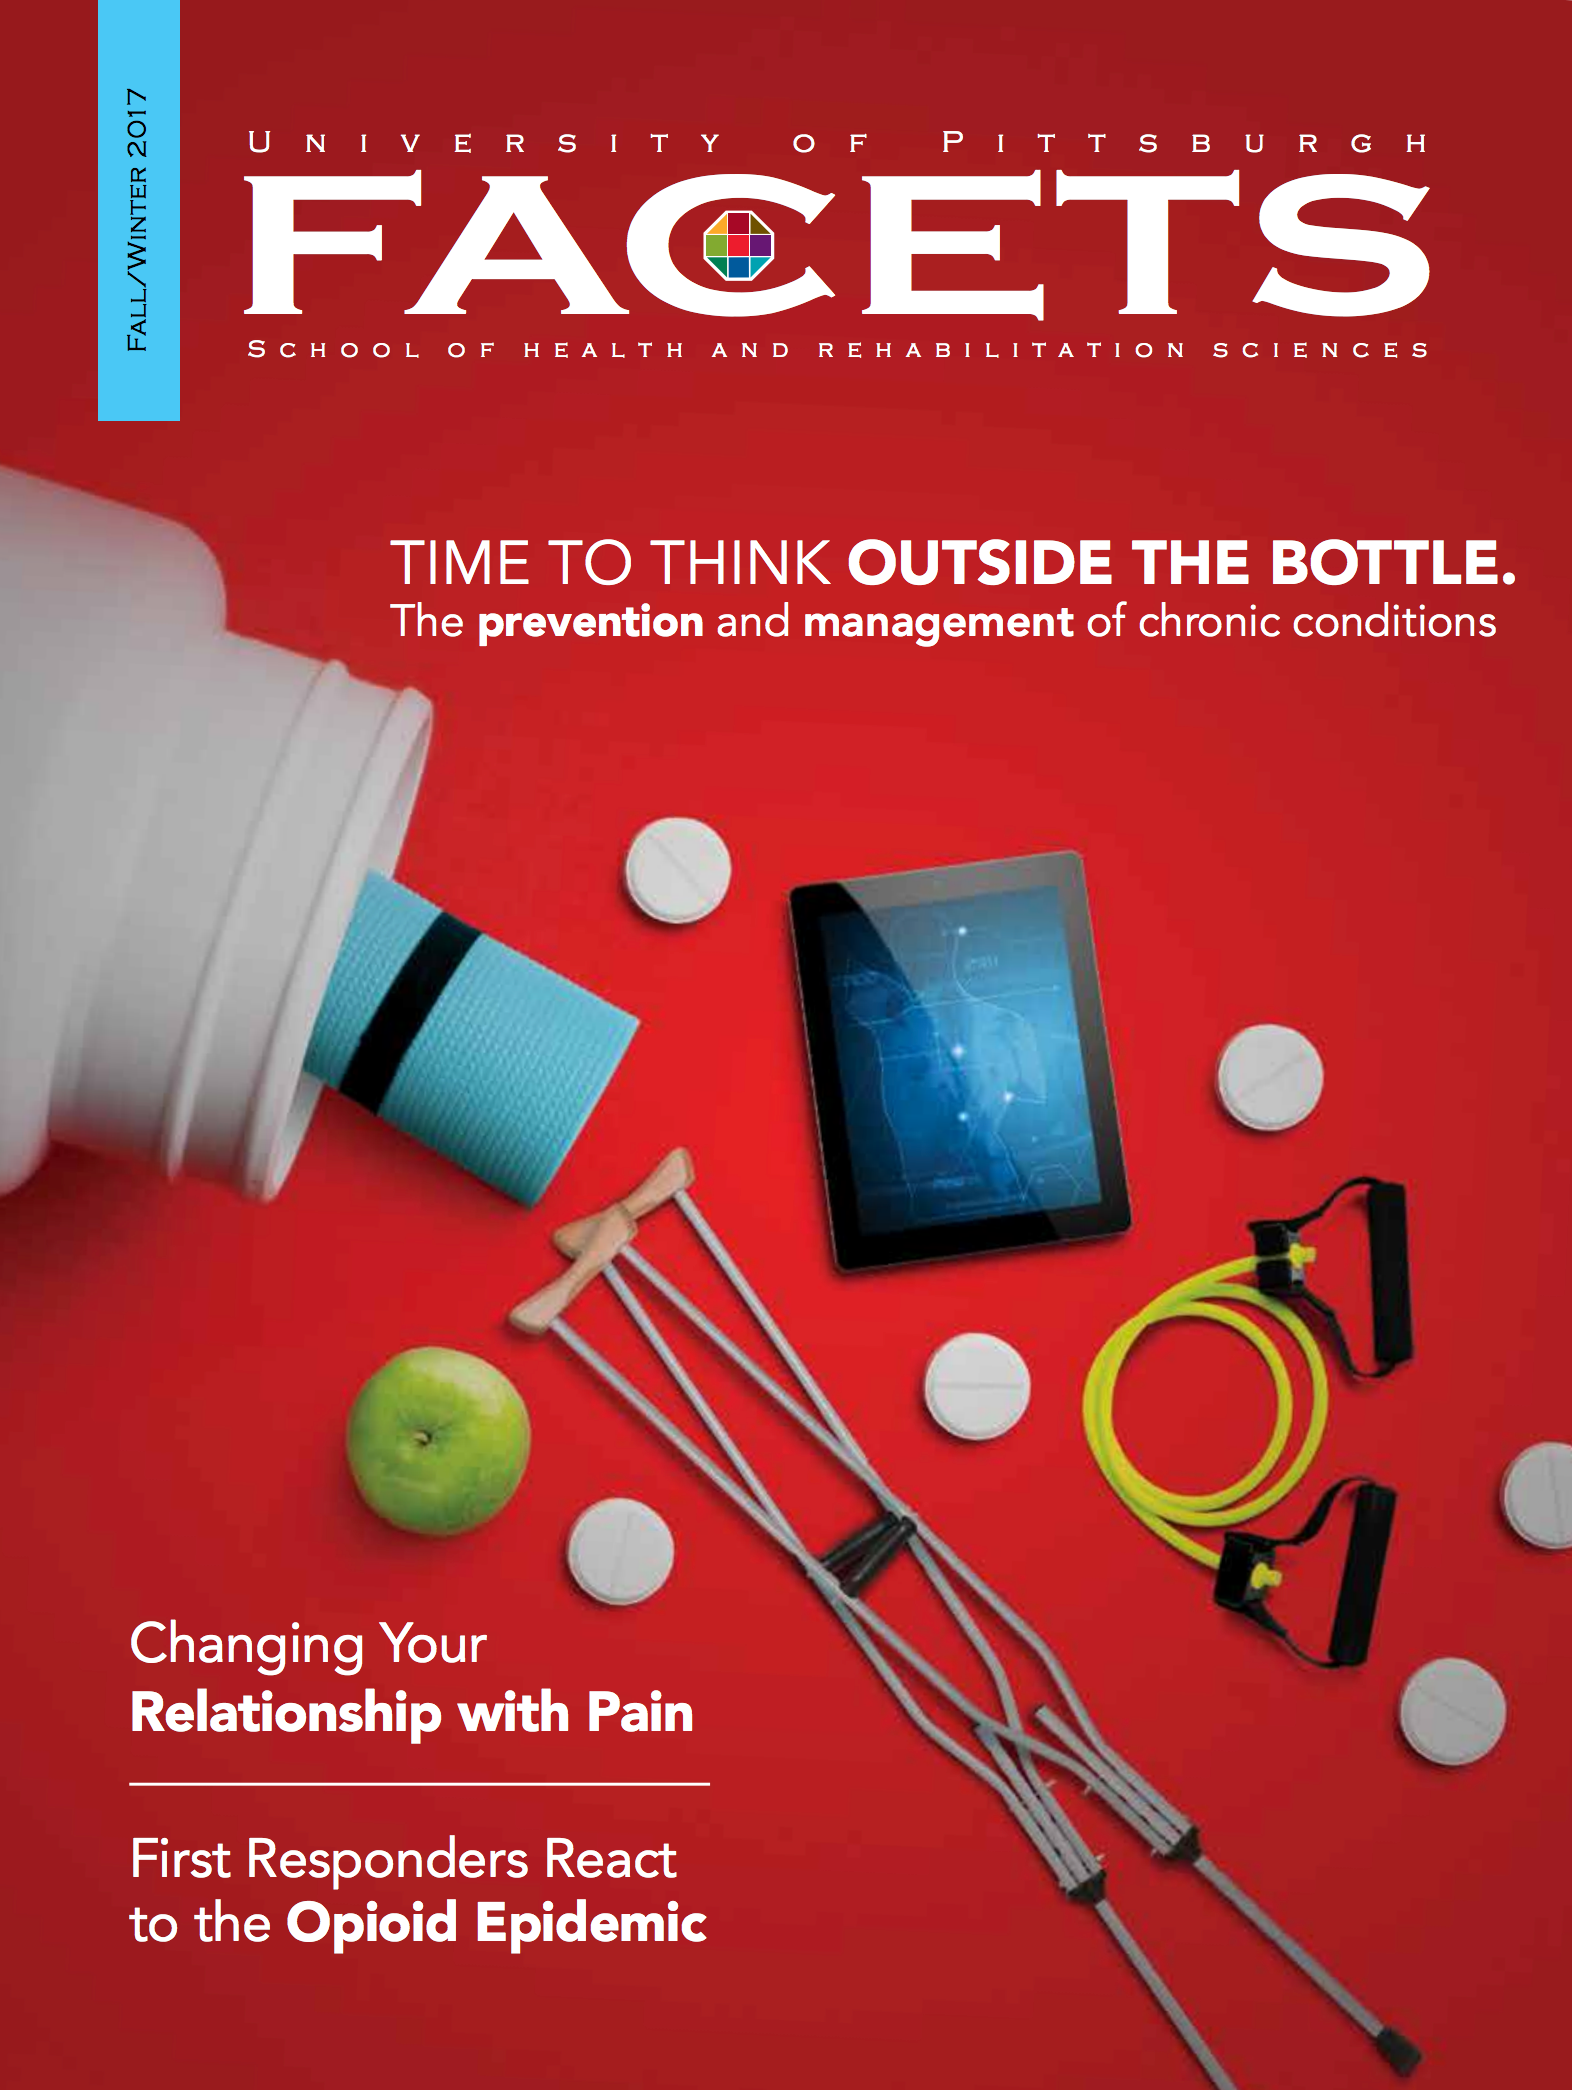 cover of the issue: bright red with pills and bottles and other medical items